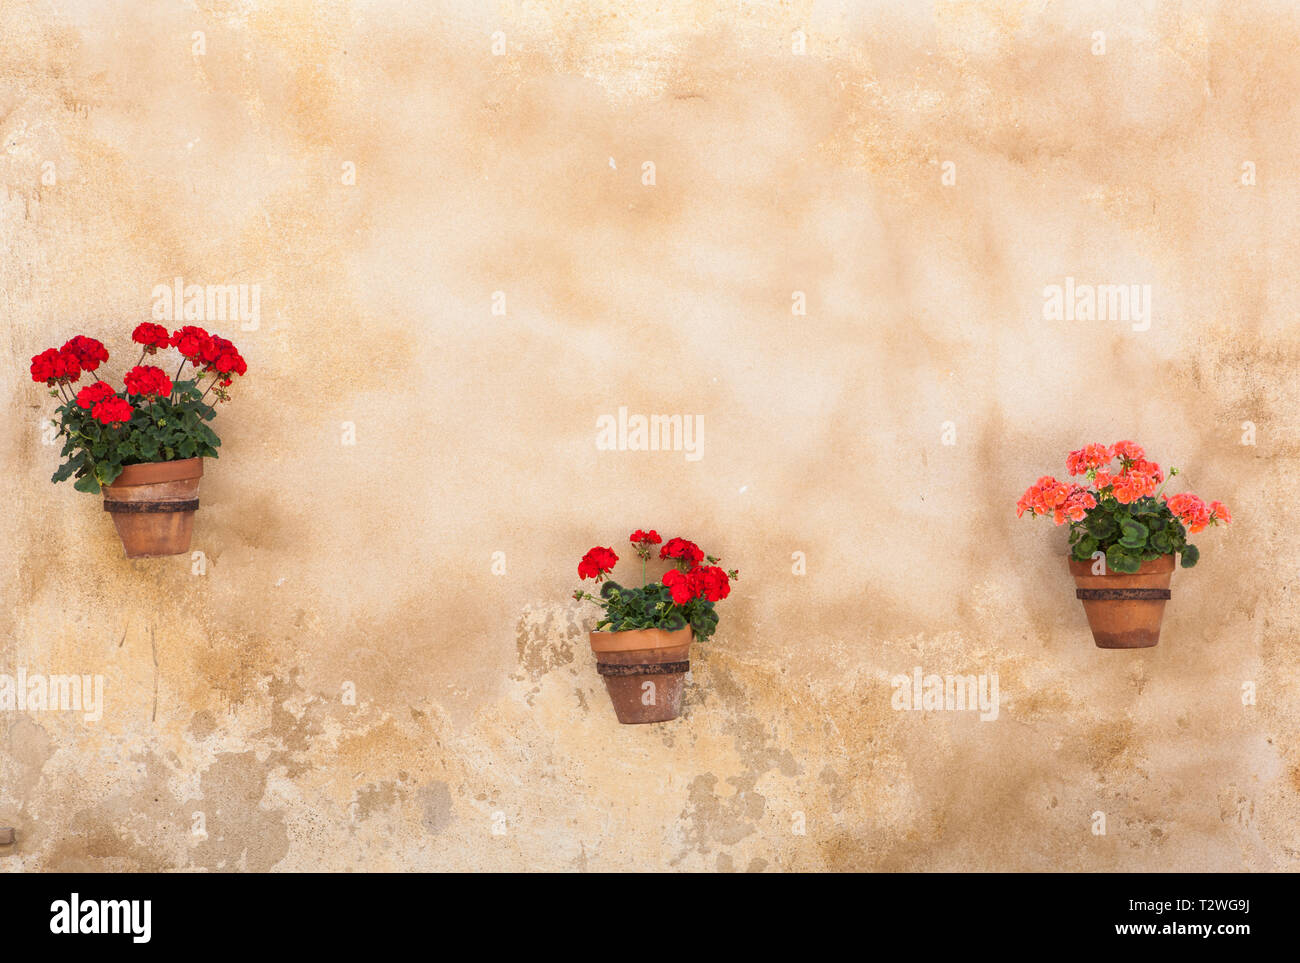 three flower pots mounted on a tan wall. Stock Photo